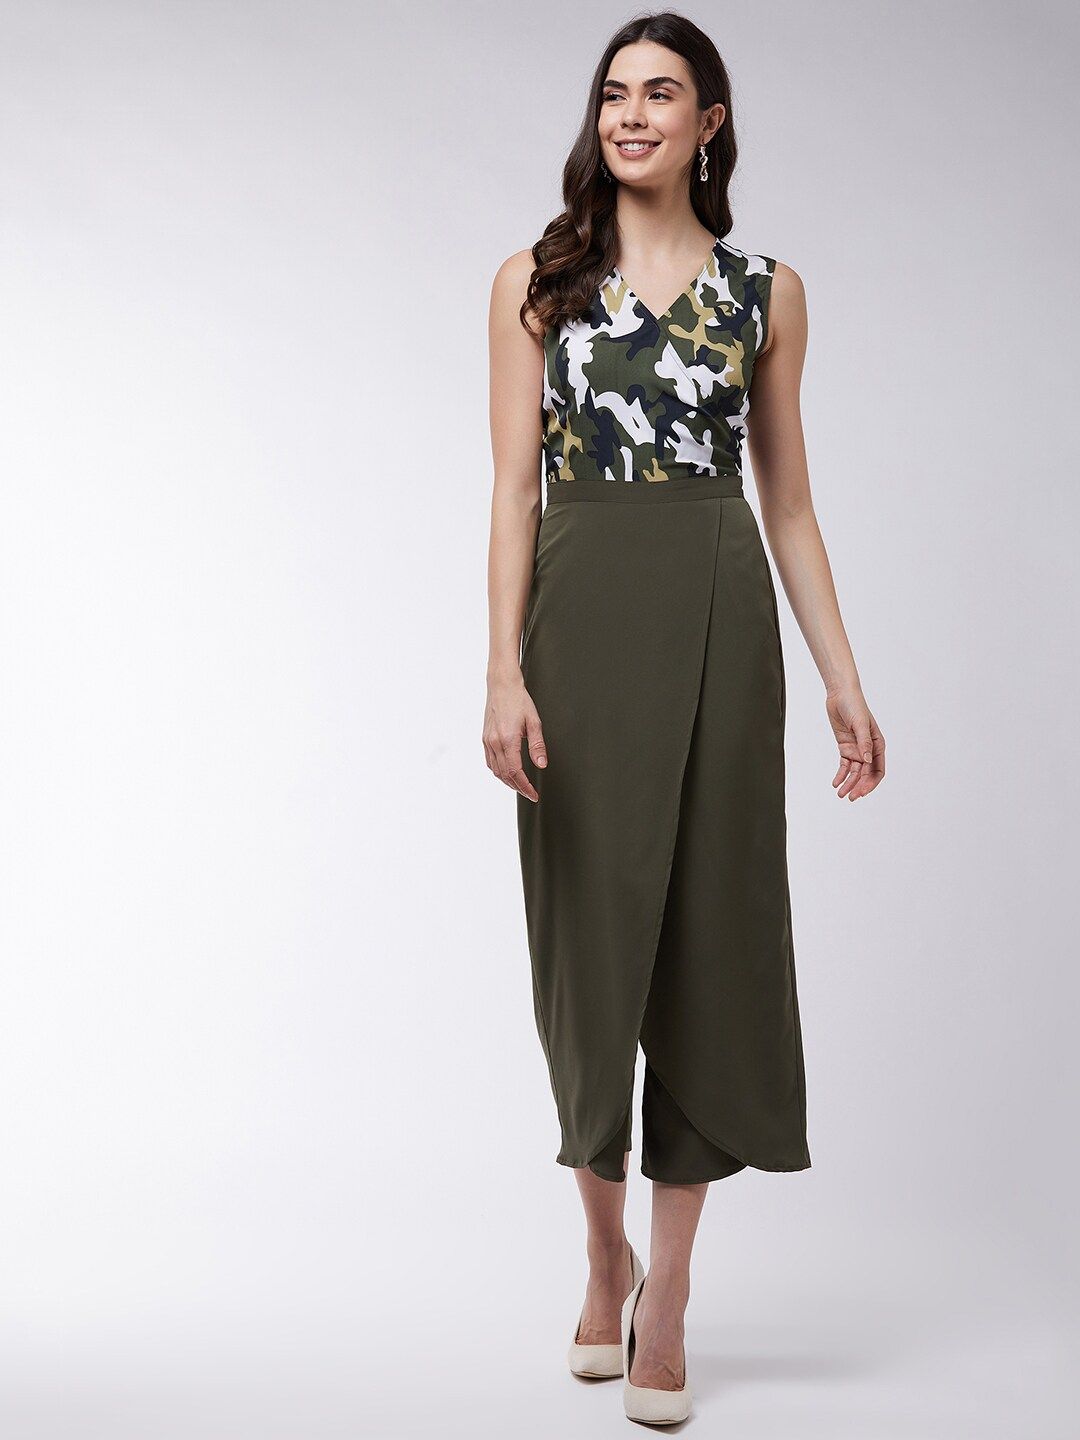 Zima Leto Women Olive Green & White Printed Culotte Jumpsuit Price in India